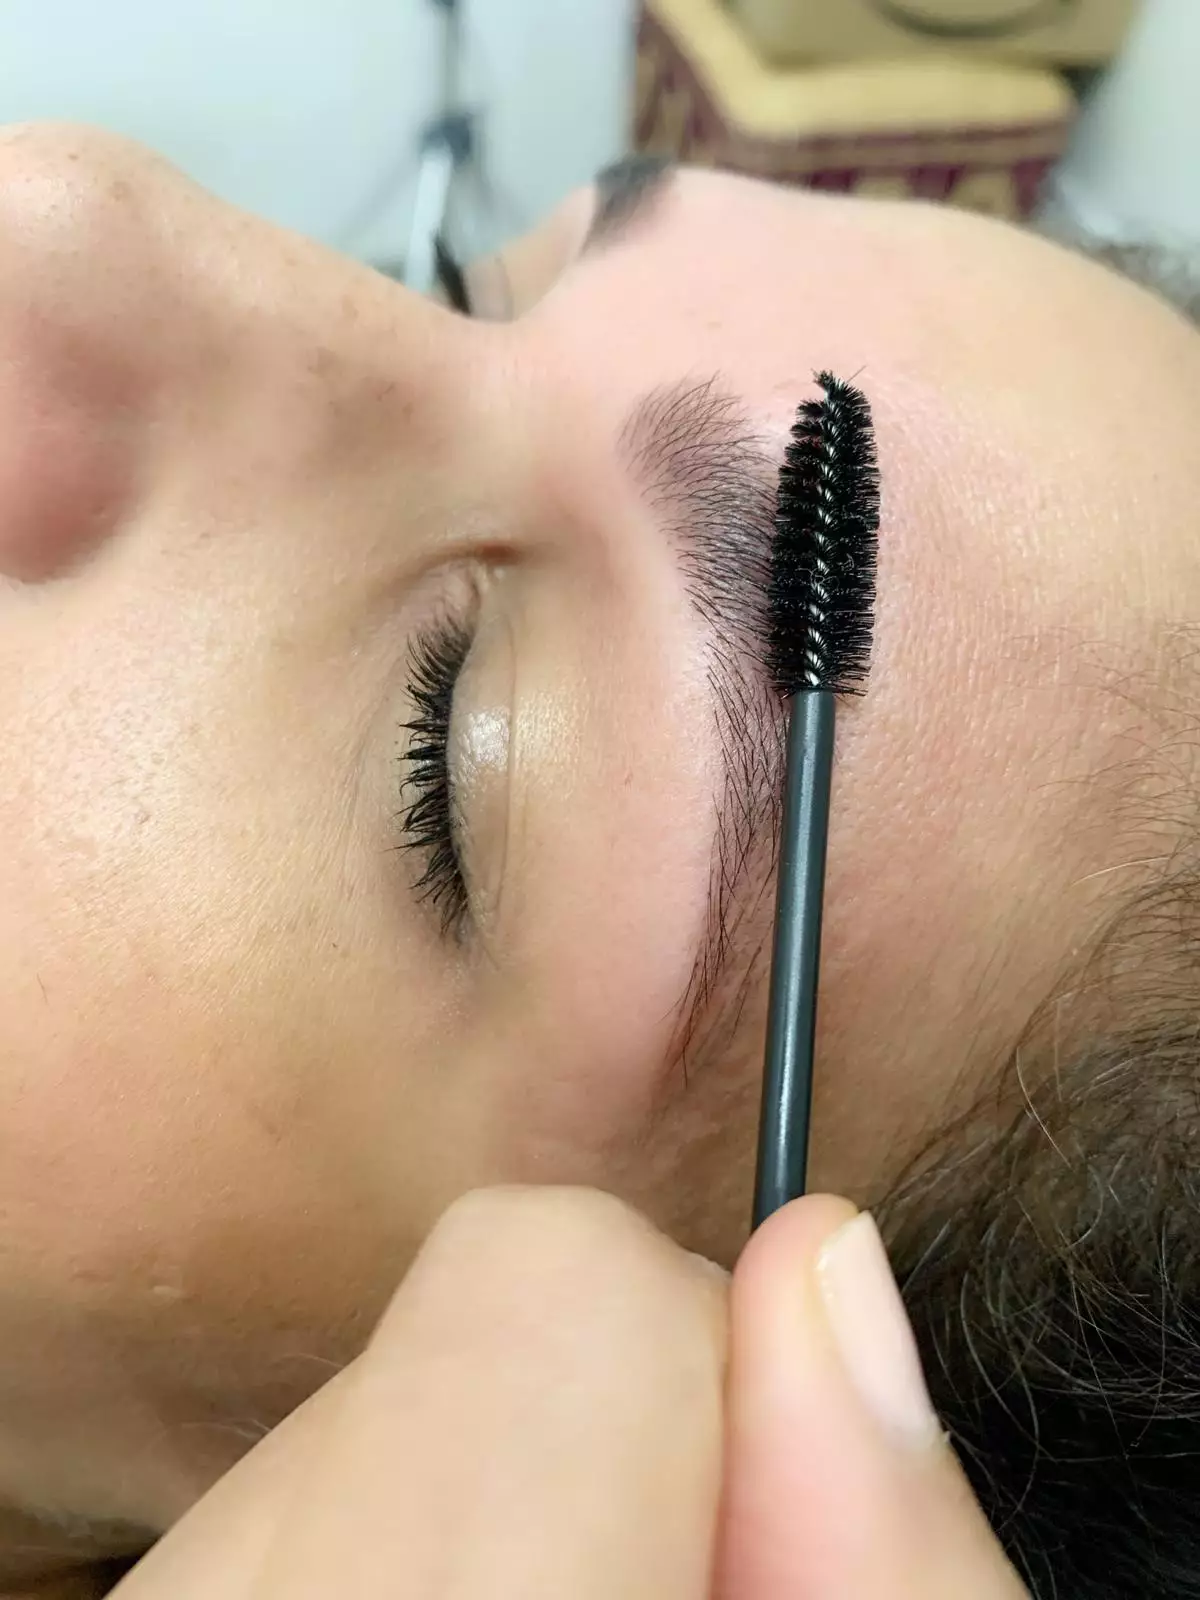 Before applying the tint, brush your brows in an upward motion (